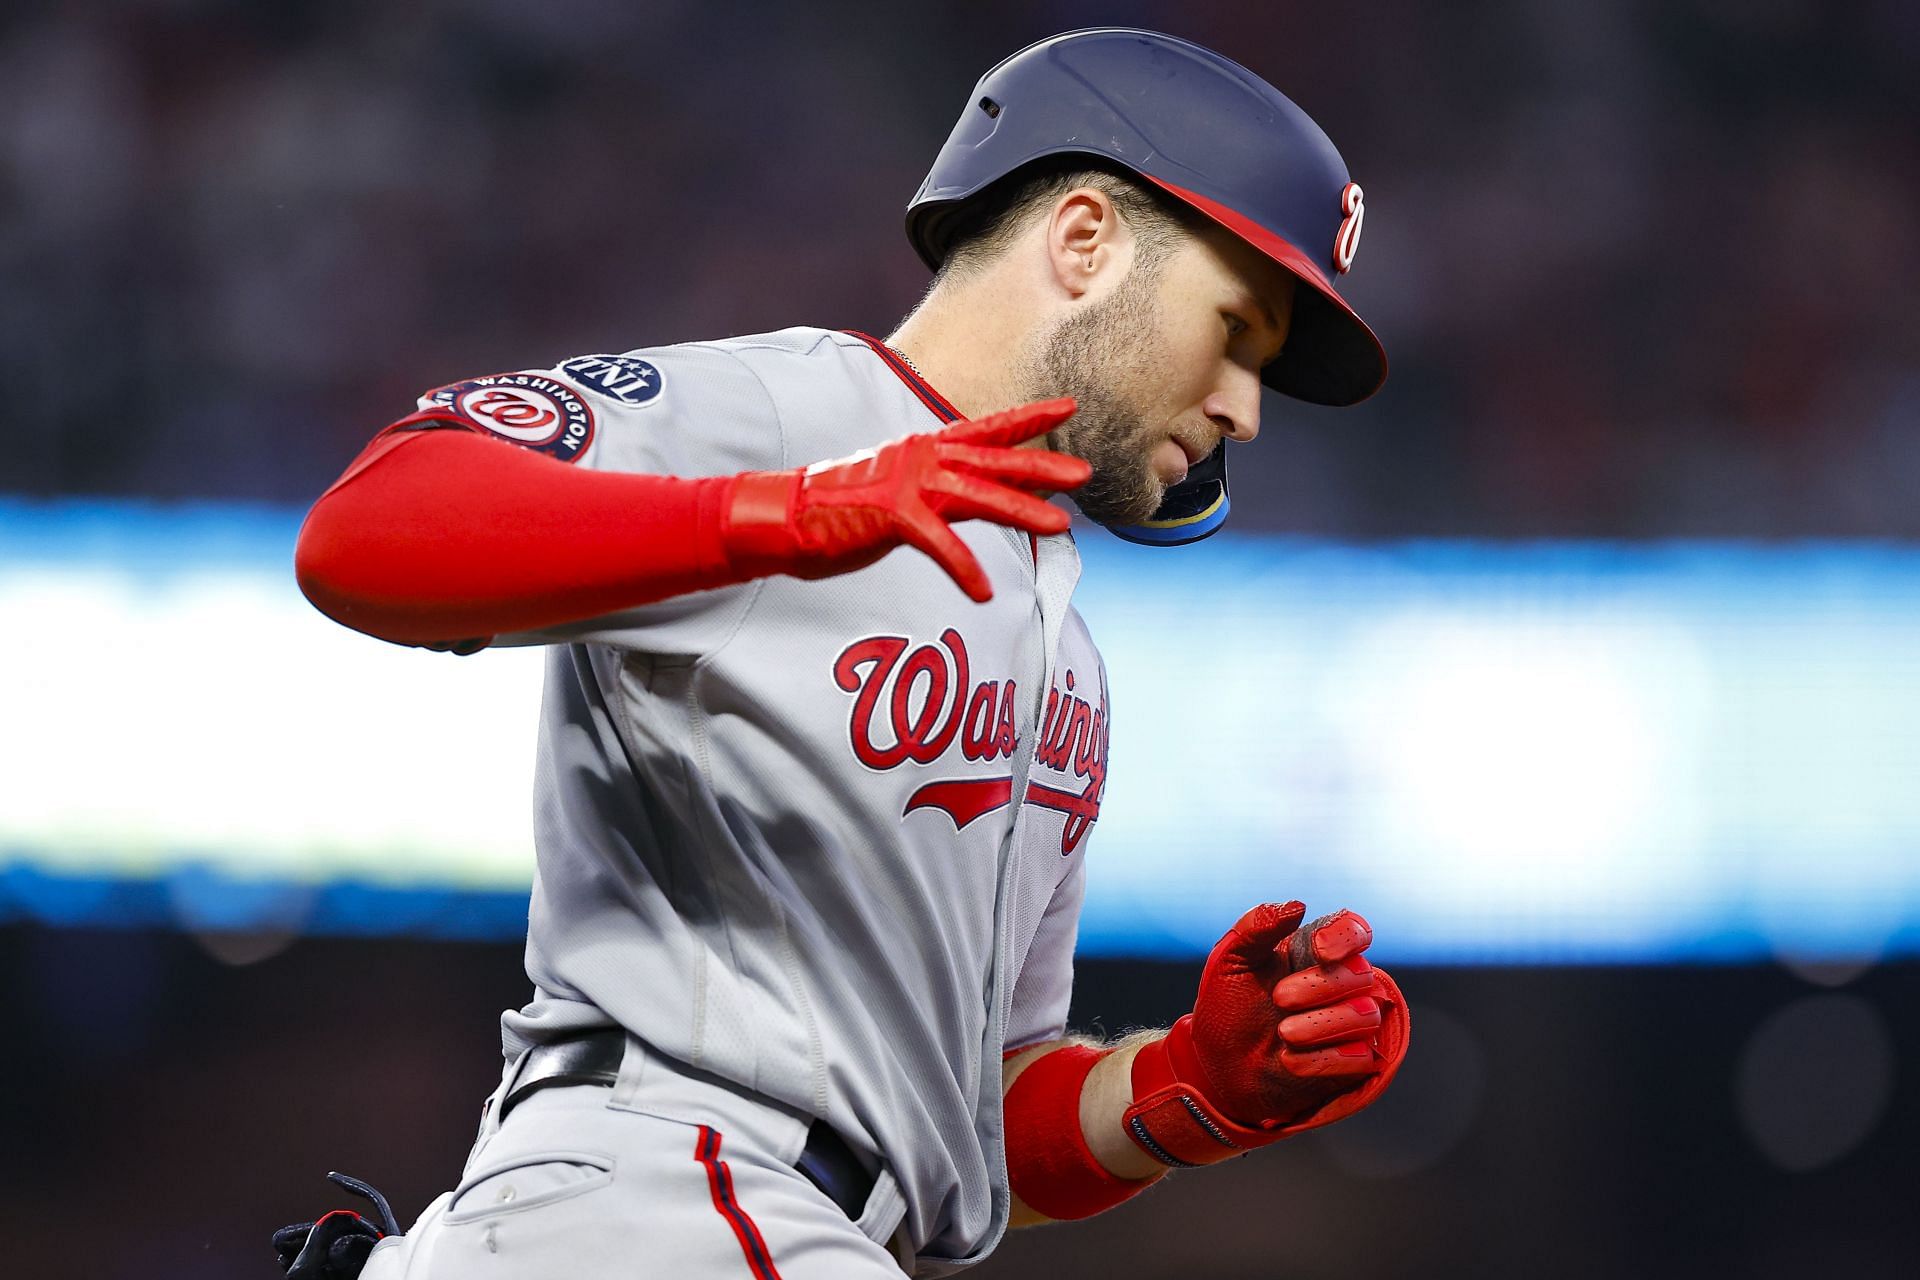 The Nationals&rsquo; overall outlook suggests a challenging road ahead.